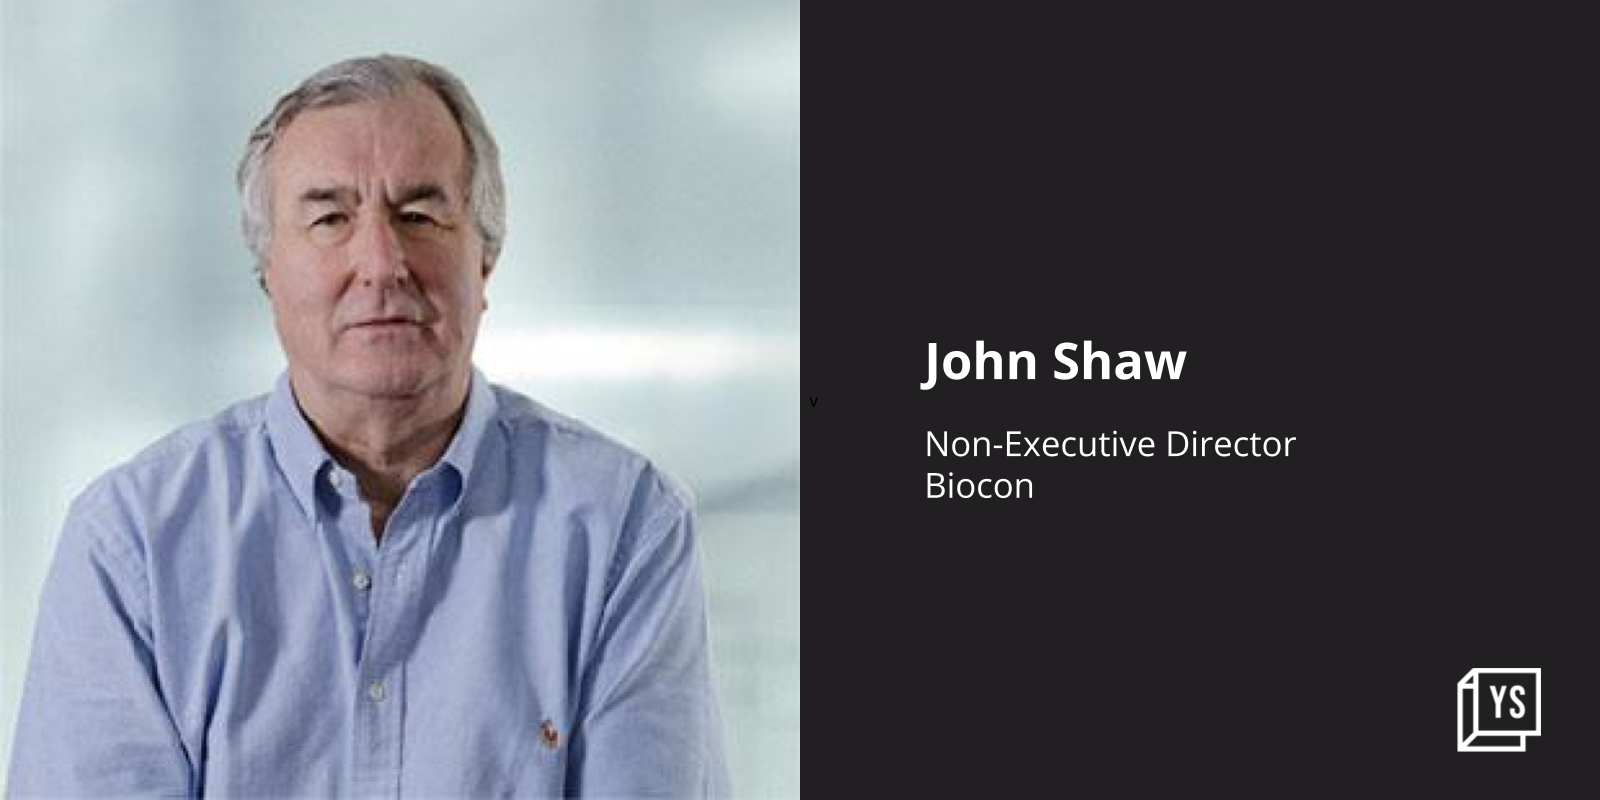 John Shaw, former Vice Chairman of Biocon, passes away at age 73